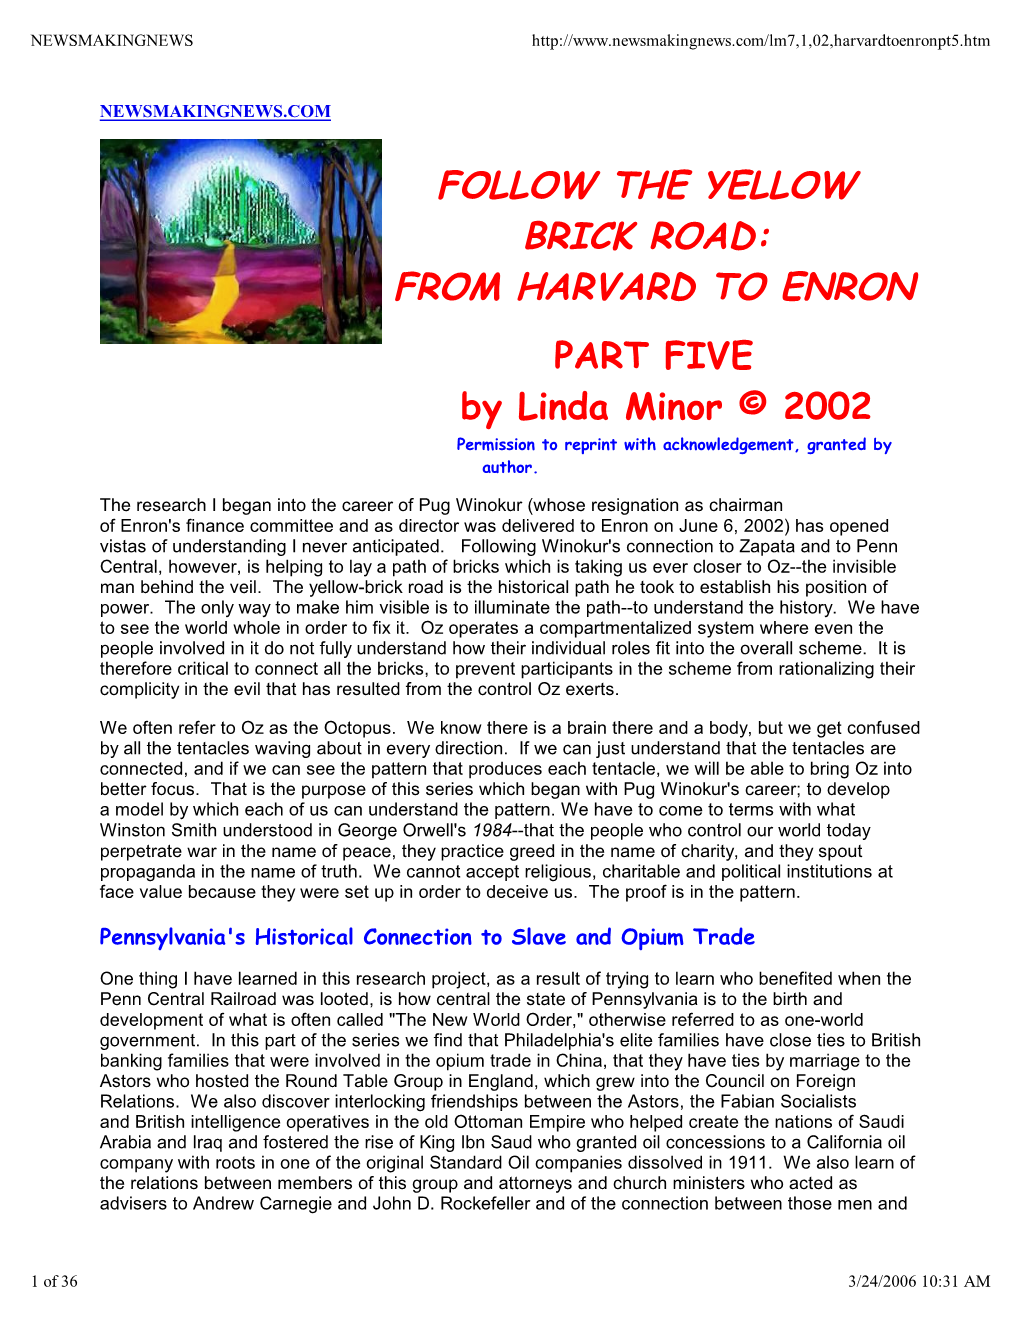 FOLLOW the YELLOW BRICK ROAD: from HARVARD to ENRON PART FIVE by Linda Minor © 2002 Permission to Reprint with Acknowledgement, Granted by Author